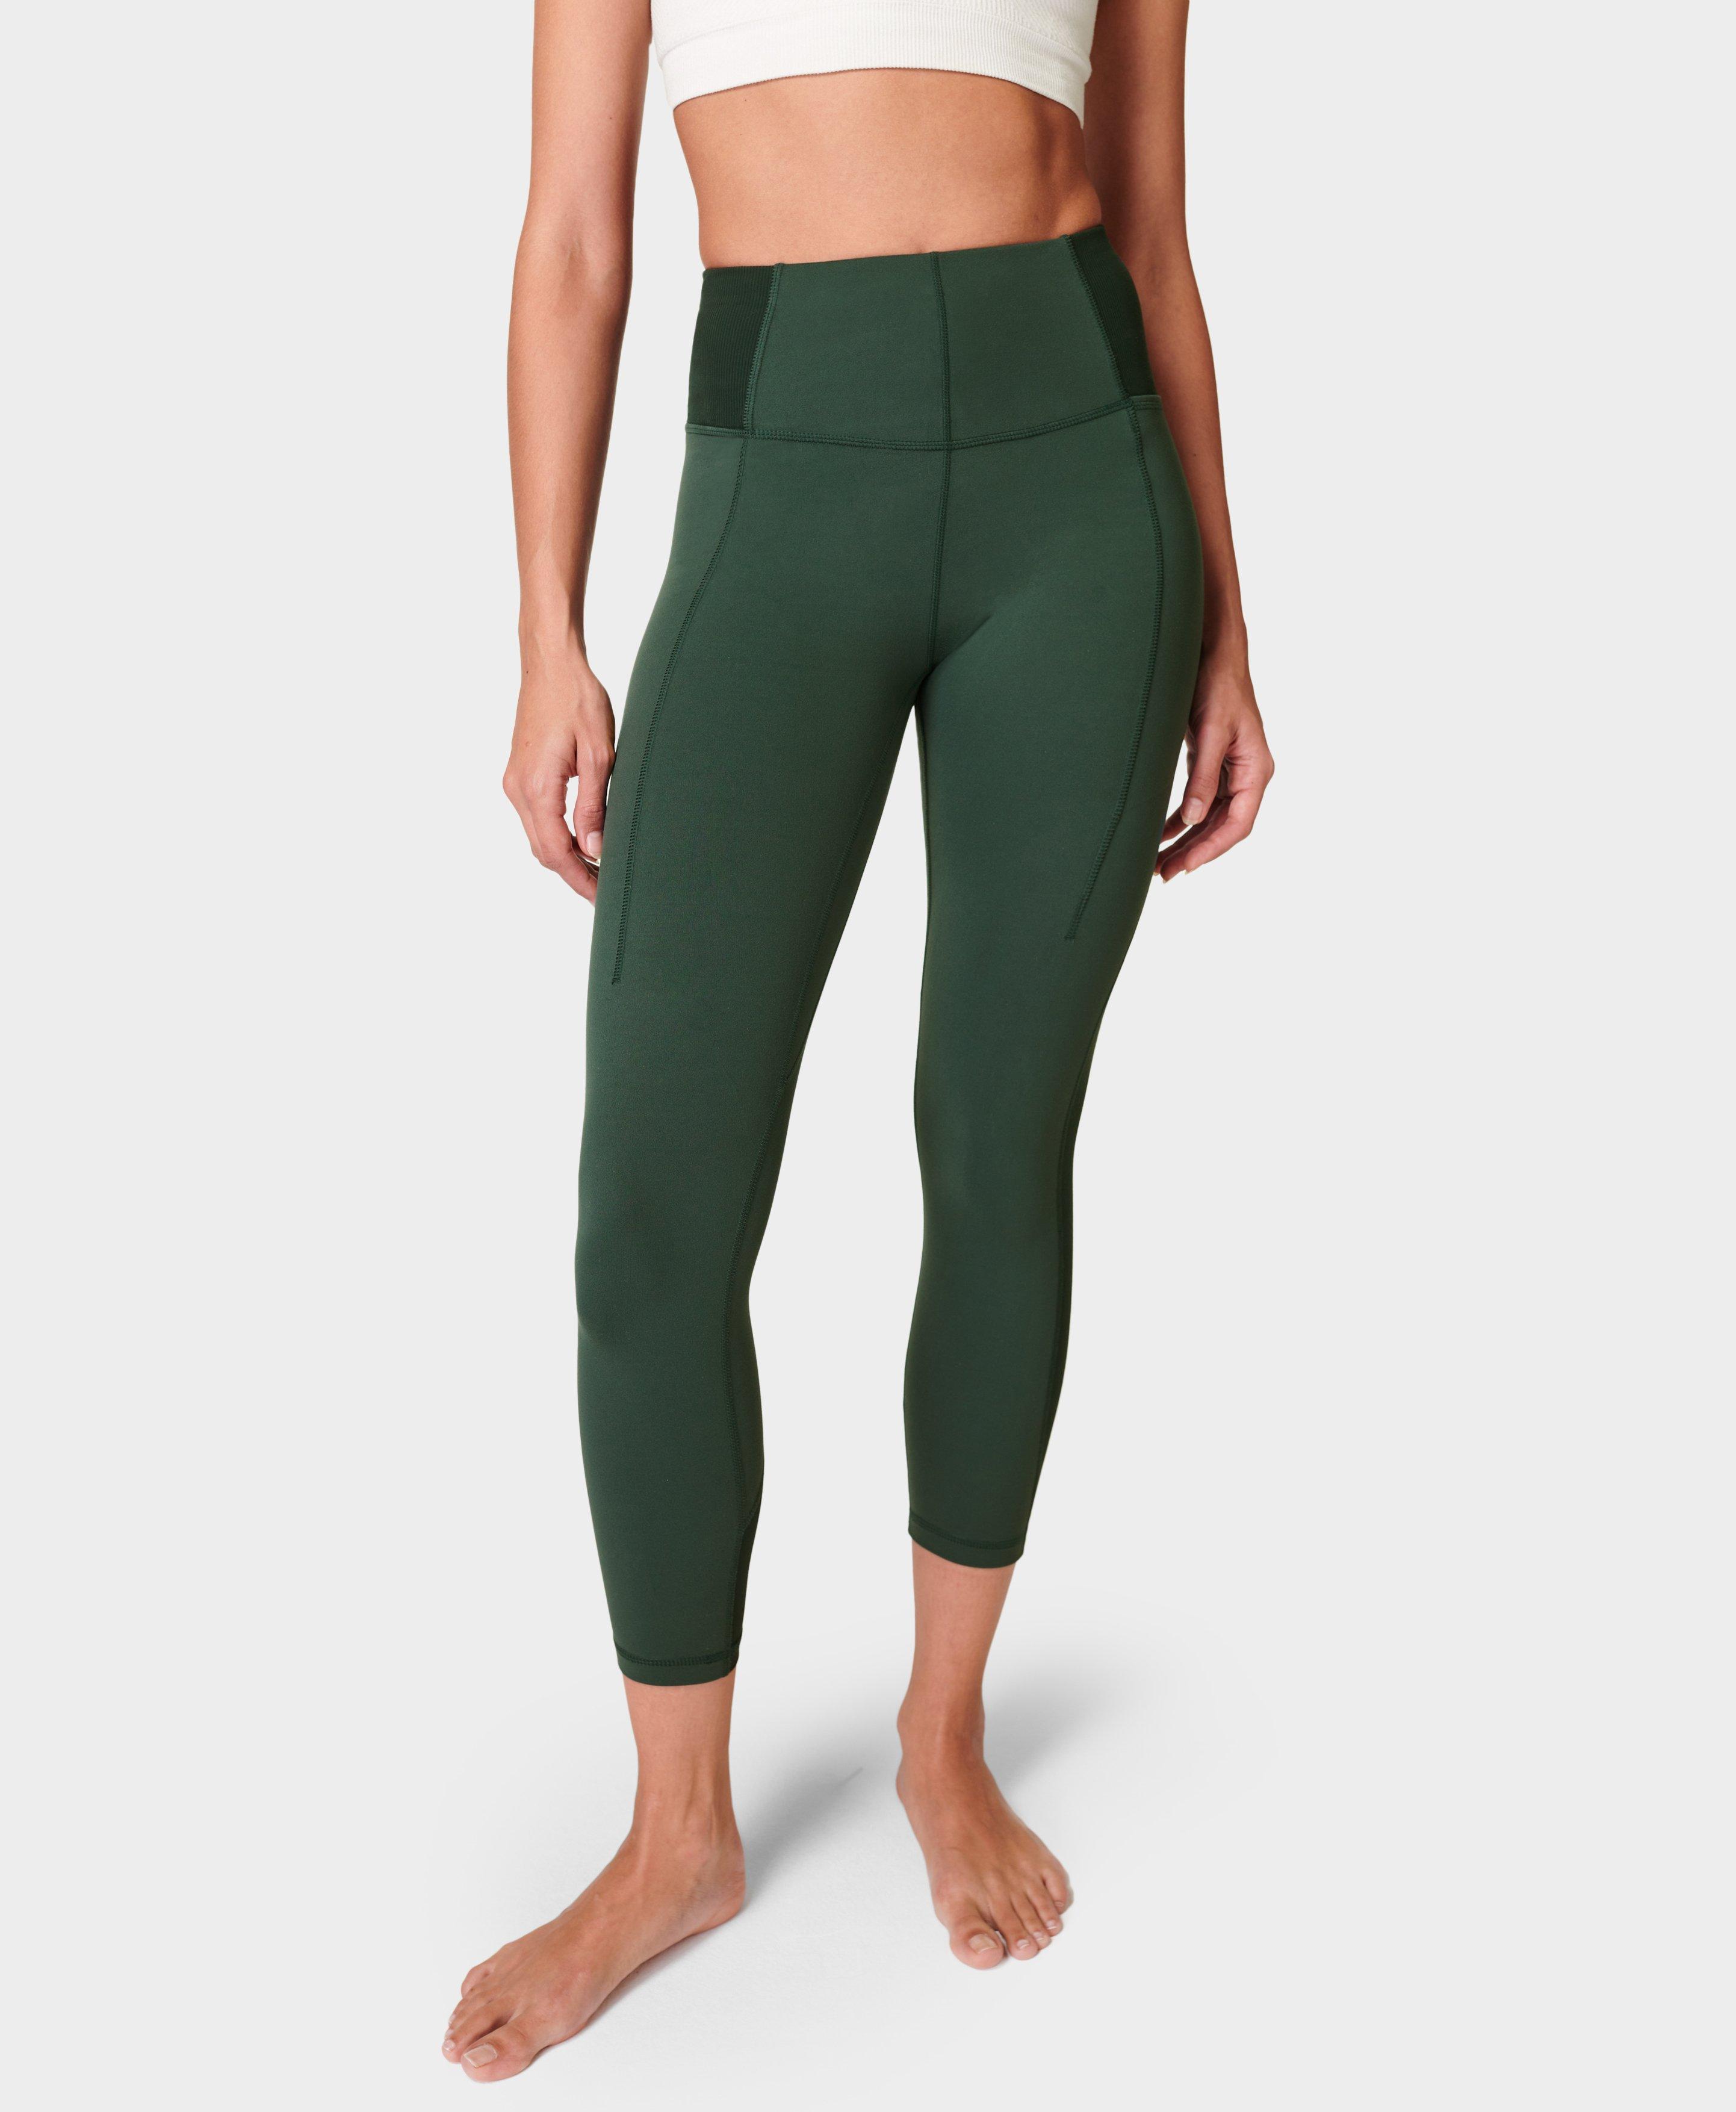 THE UPSIDE Ombré ribbed stretch recycled-knit 7/8 leggings